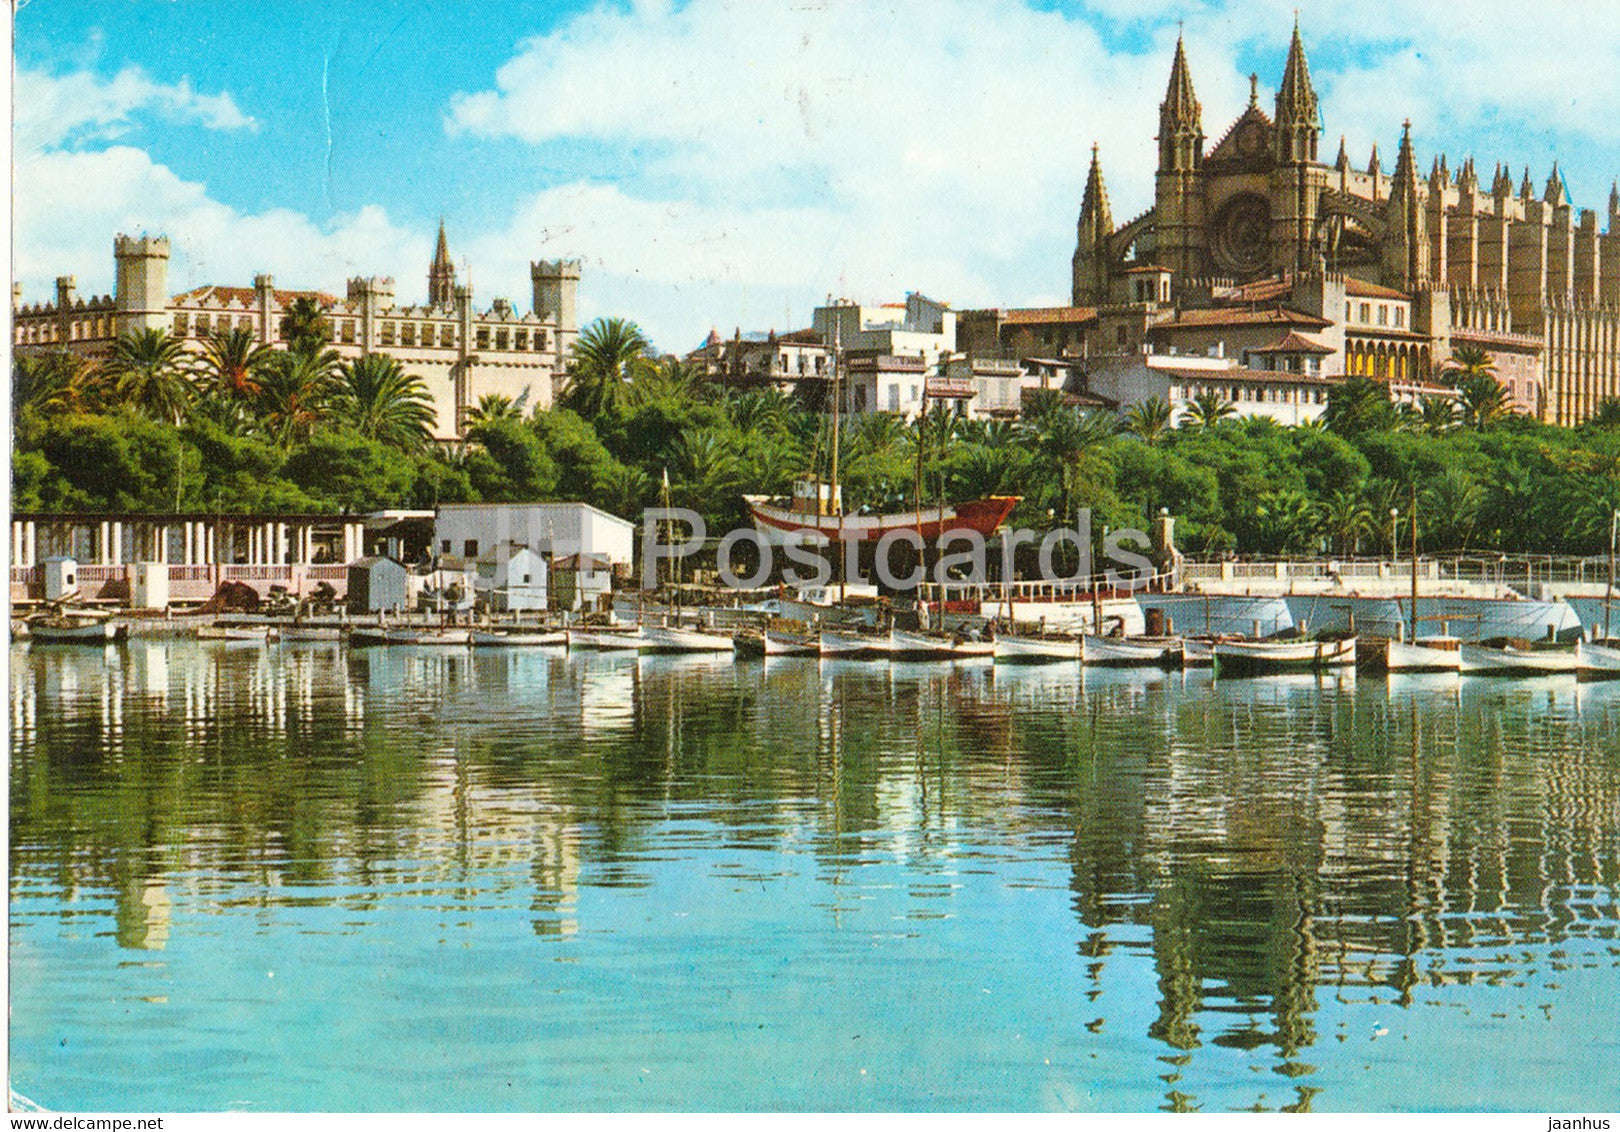 Palma de Mallorca - La Lonja y Catedral - The Exchange and cathedral  - 220 - 1976 - Spain - used - JH Postcards